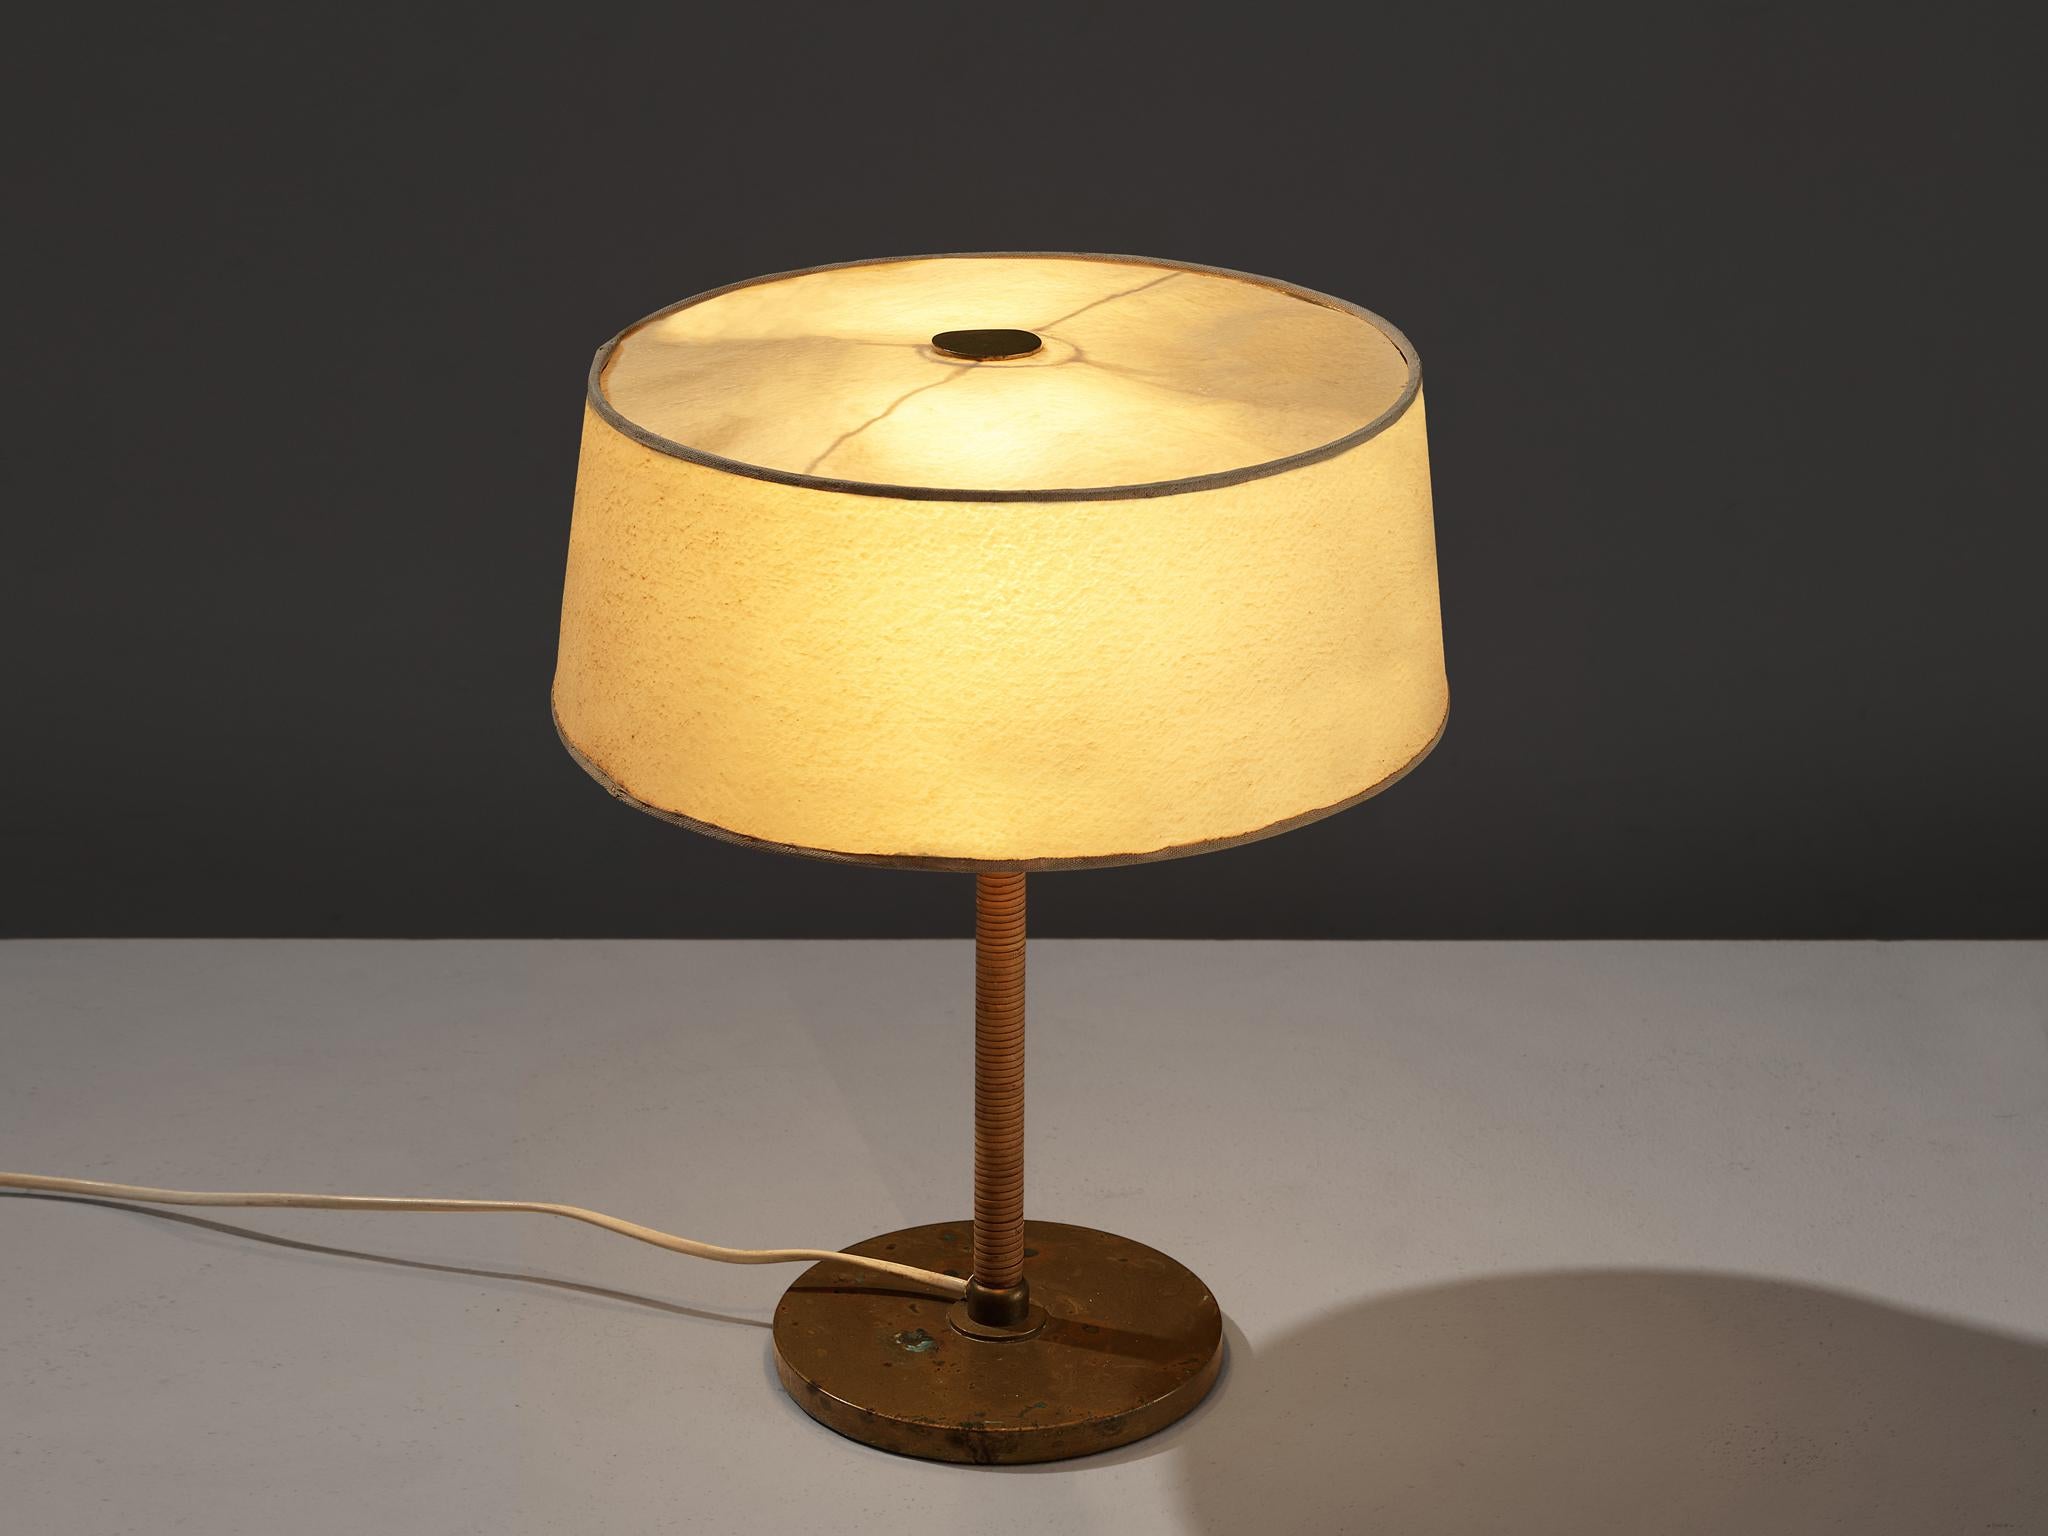 Paavo Tynell for Oy Taito Ab, table lamp, brass, cane, iron, Finland, 1930s

Early Paavo Tynell table lamp designed for Taito. This exquisite table lamp already holds all the characteristics of a true Tynell design. The slim stem covered in cane,